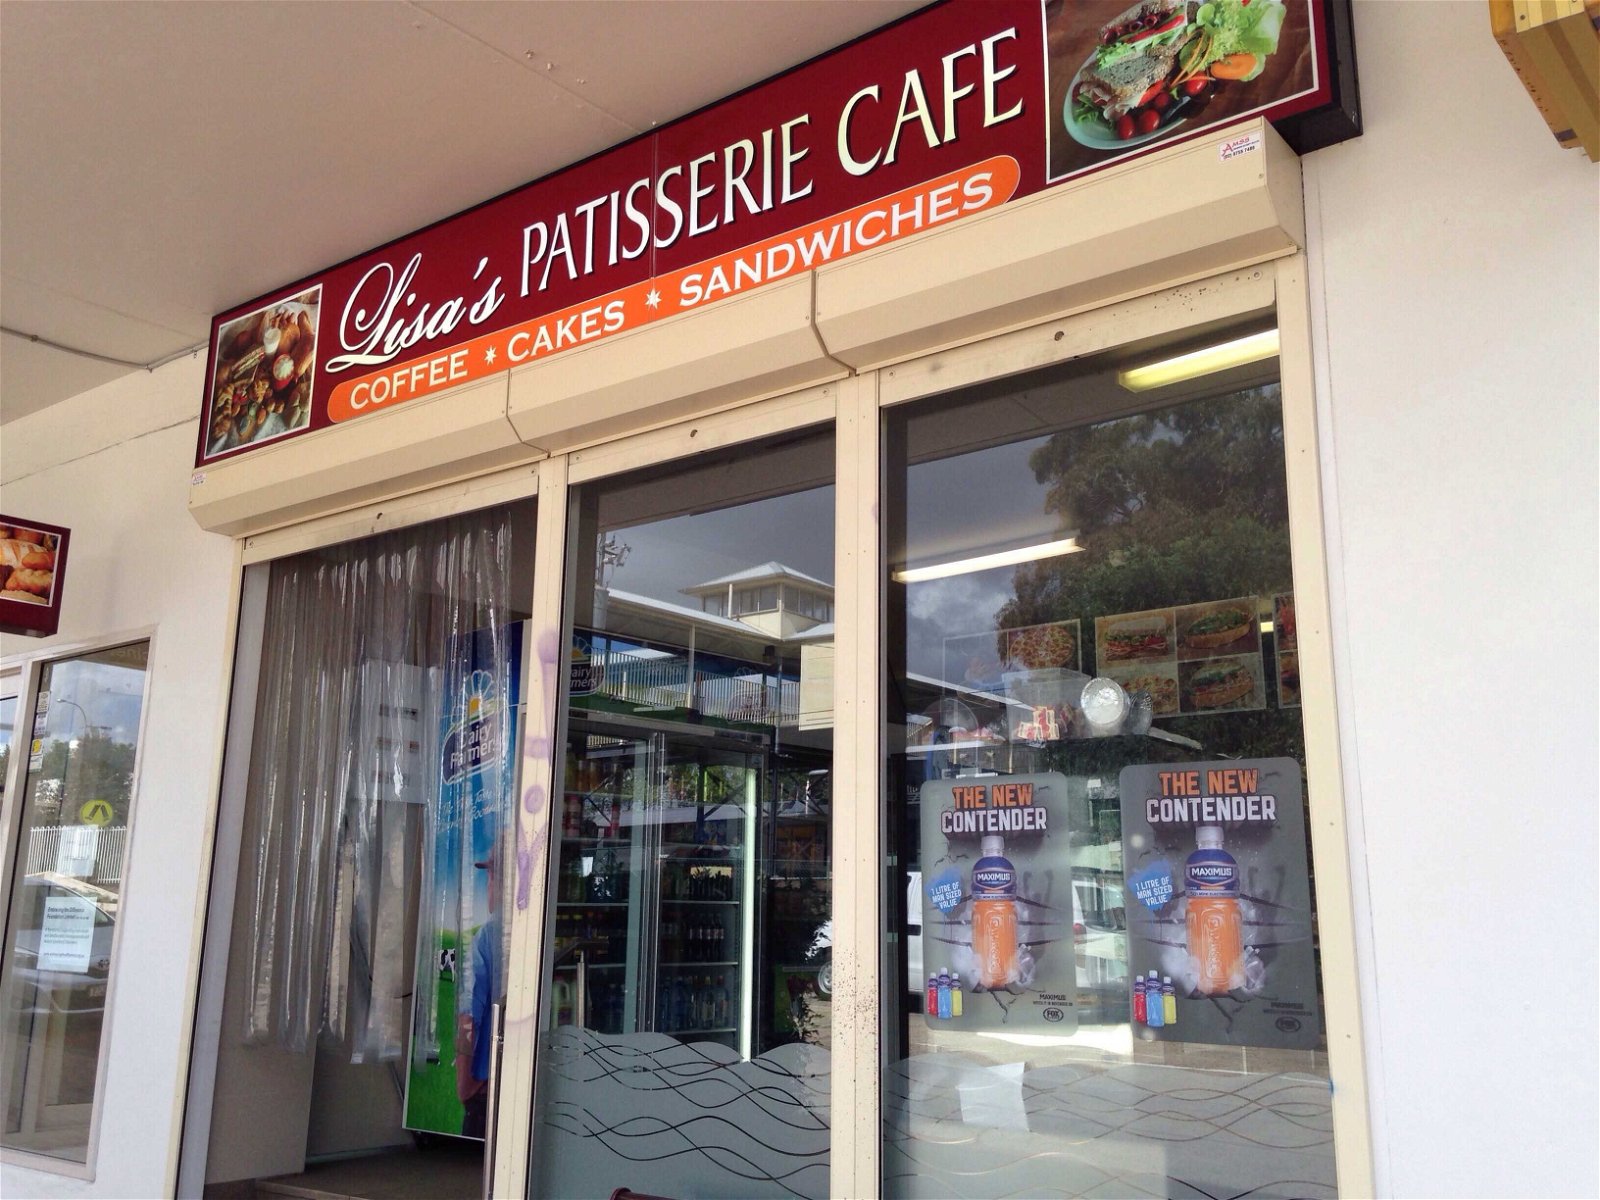 Lisa's Patisserie Cafe - Accommodation Find 0